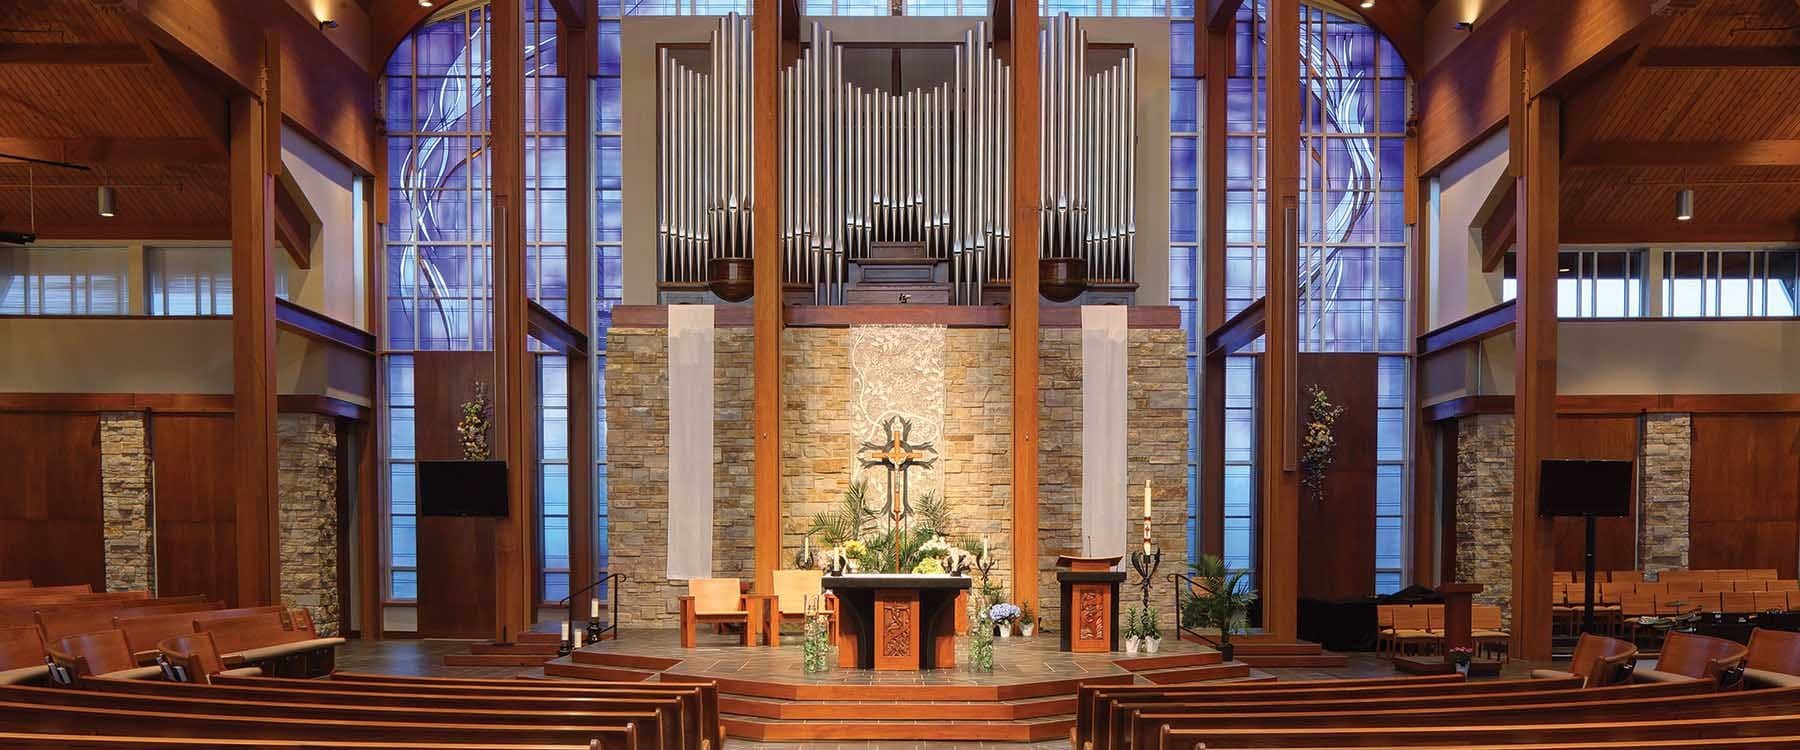 The Sanctuary for Holy Family Catholic Church in Fond Du Lac, Wisconsin combines natural materials include glue-lam beams, contemporary stained glass, simple Catholic Altar, and pipe organ pipes to provide an uplifting worship experience